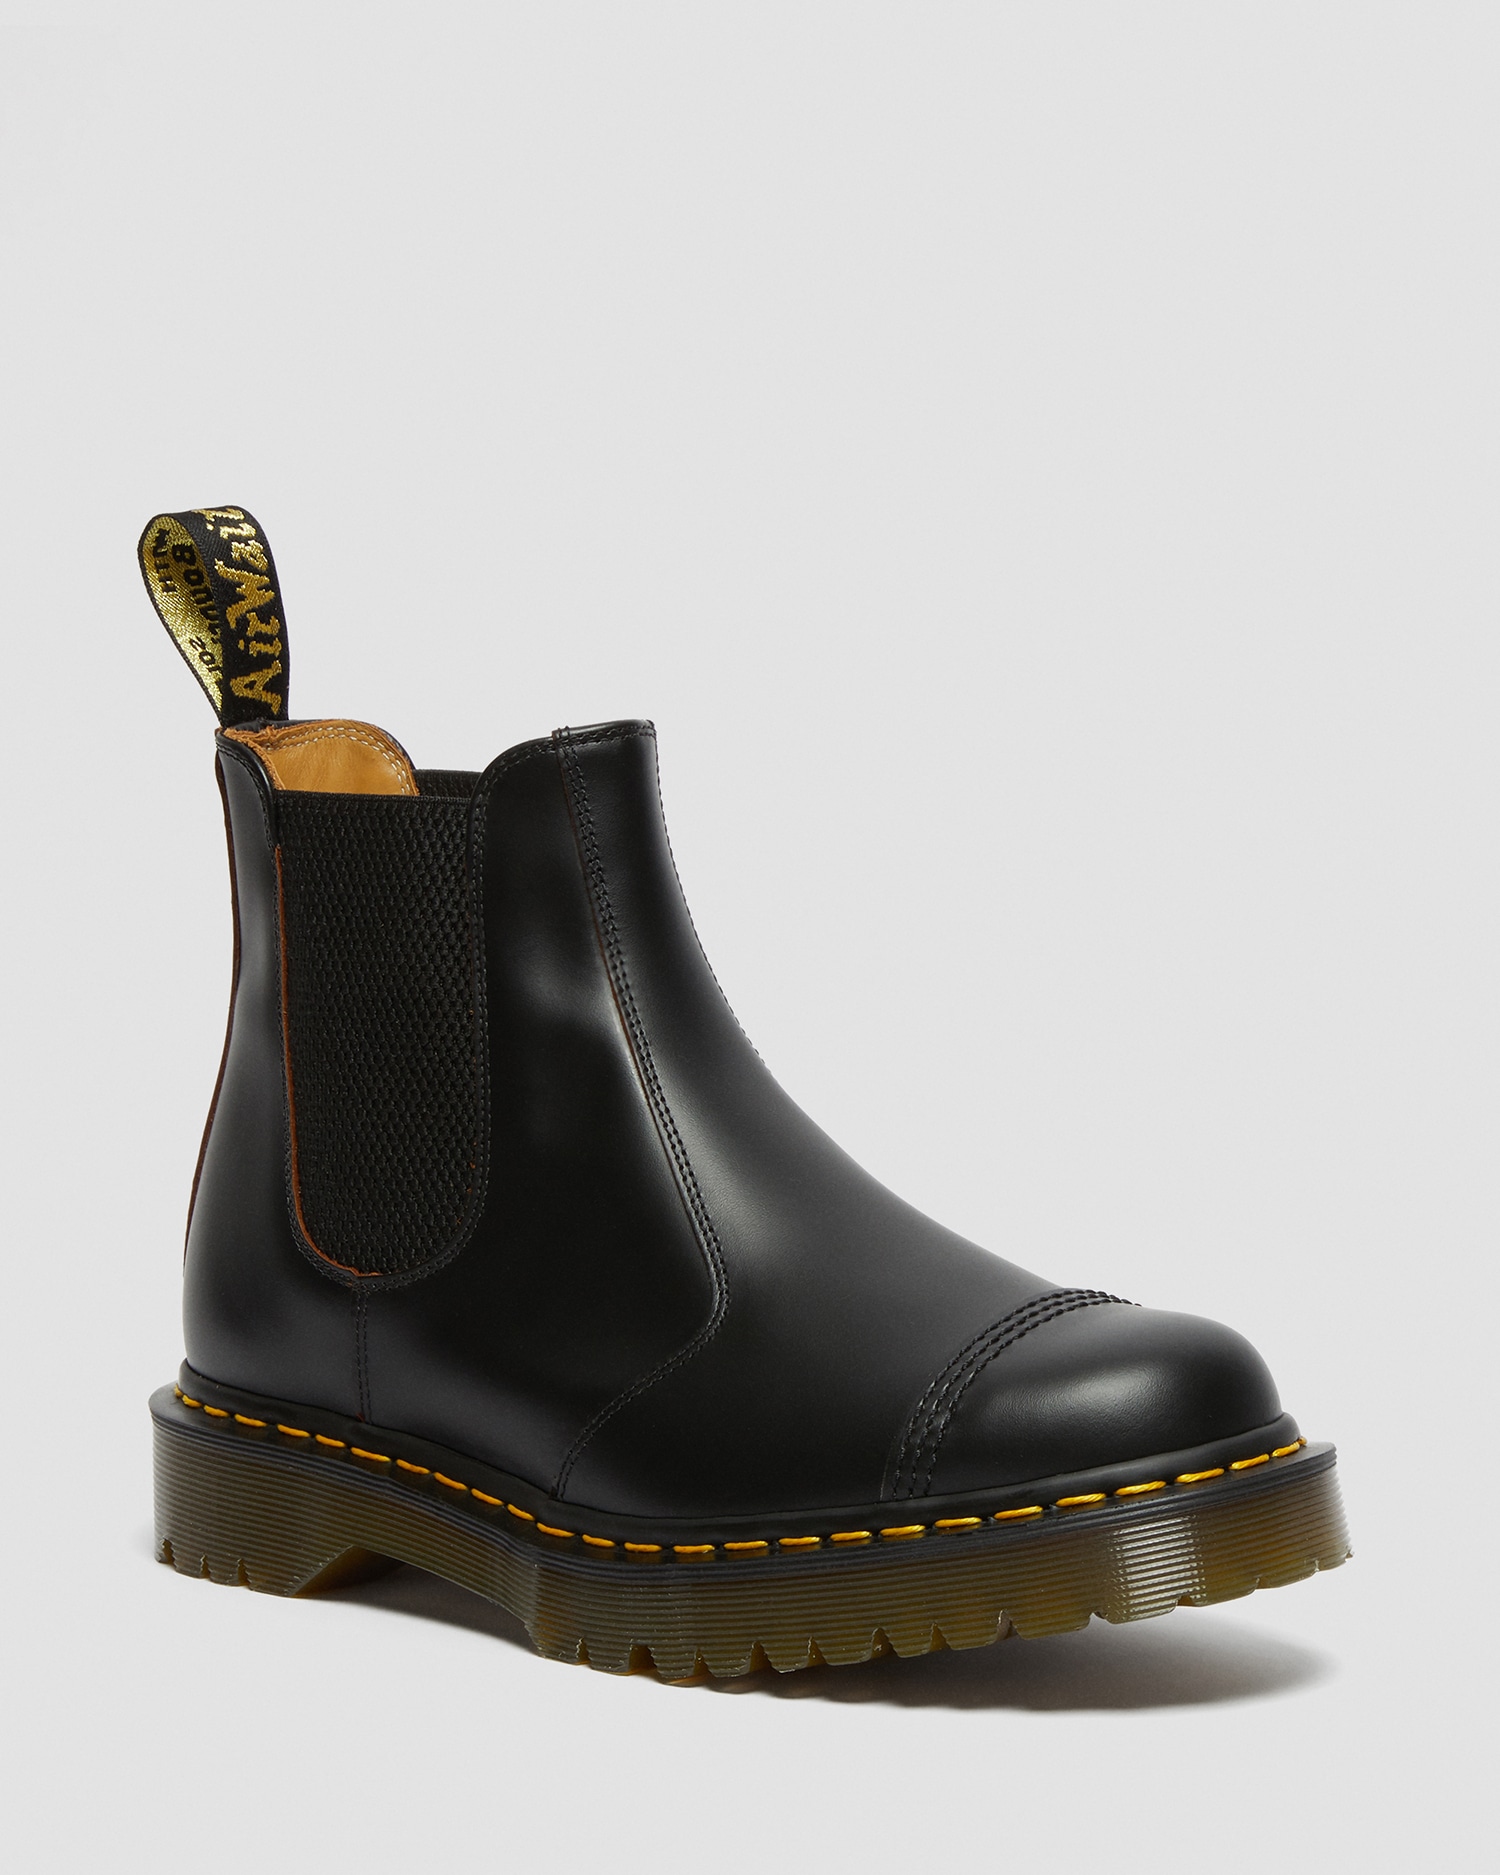 Dr Black Womens Shoes Boots Ankle boots Martens Dr Martens Industrial Laces in Black & Yellow 